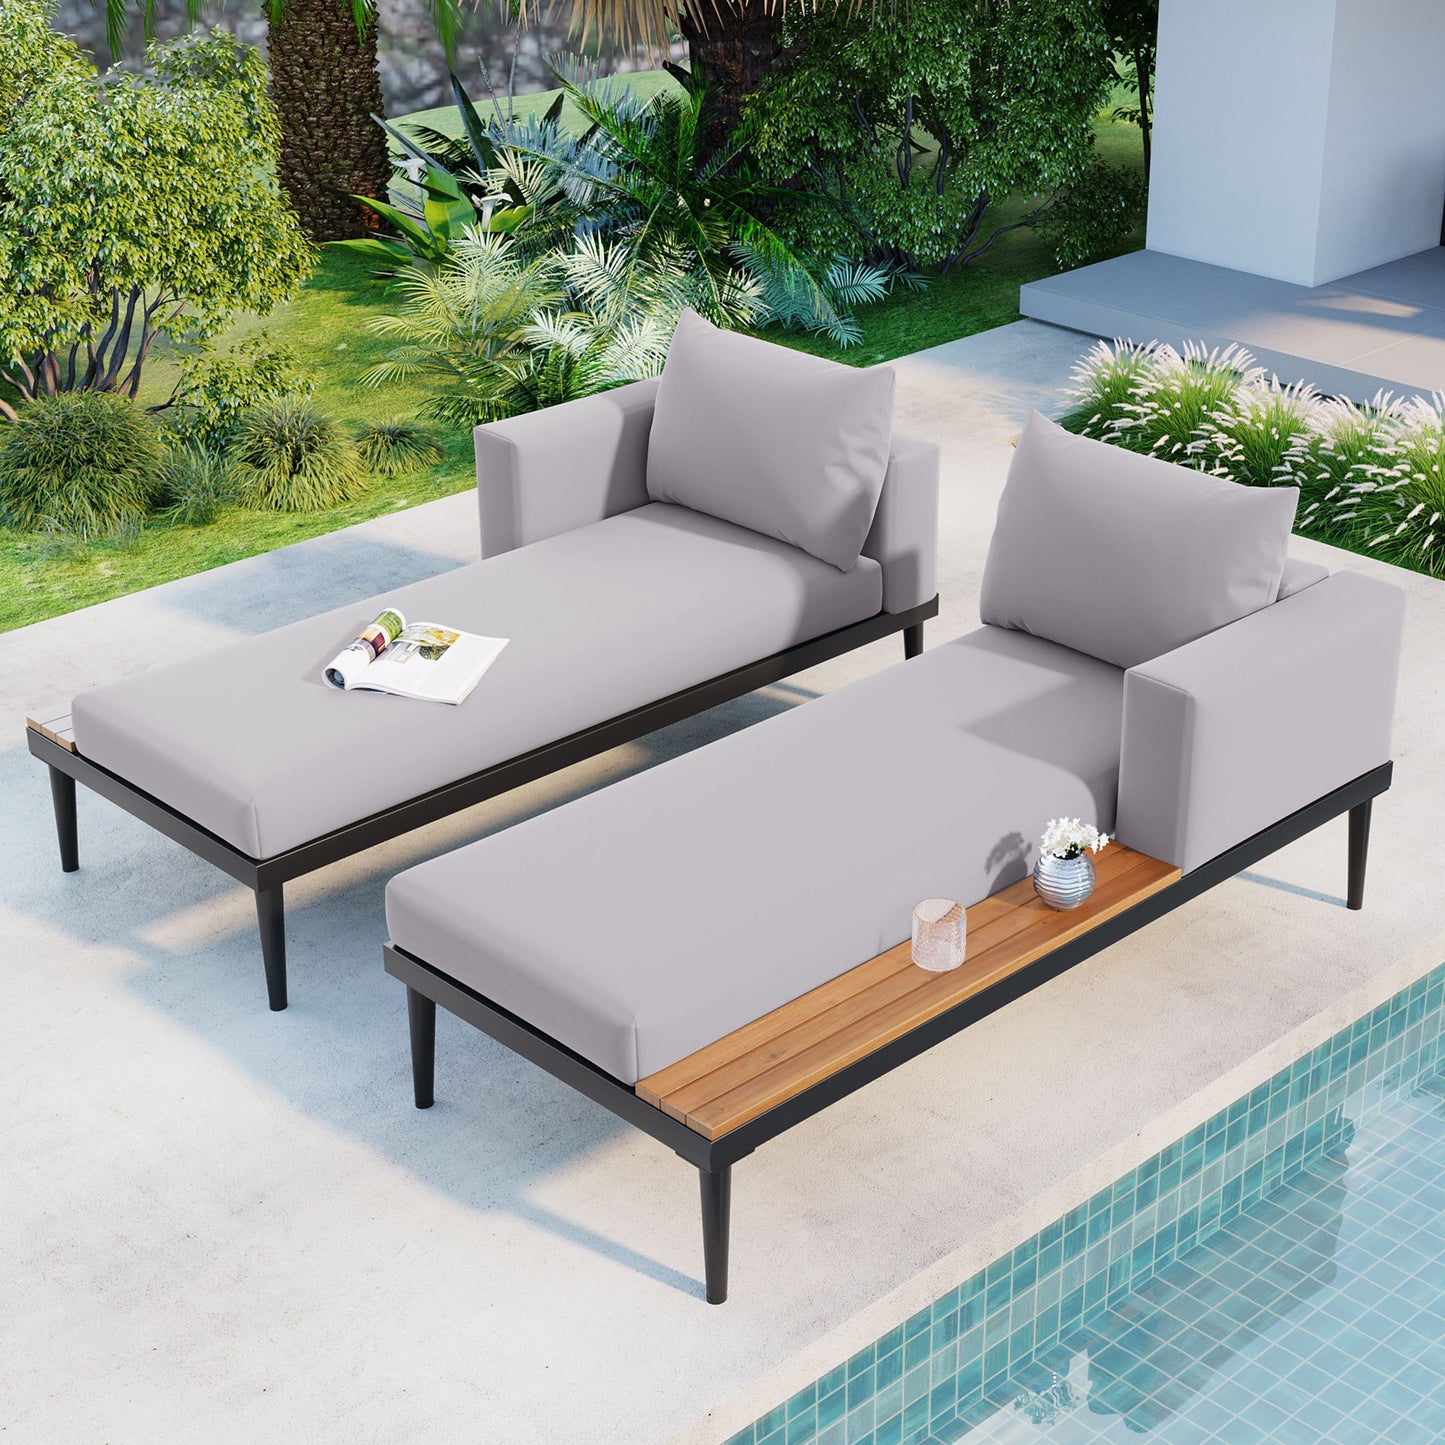 Outdoor Daybed Patio with Wood Topped Side Spaces for Drinks